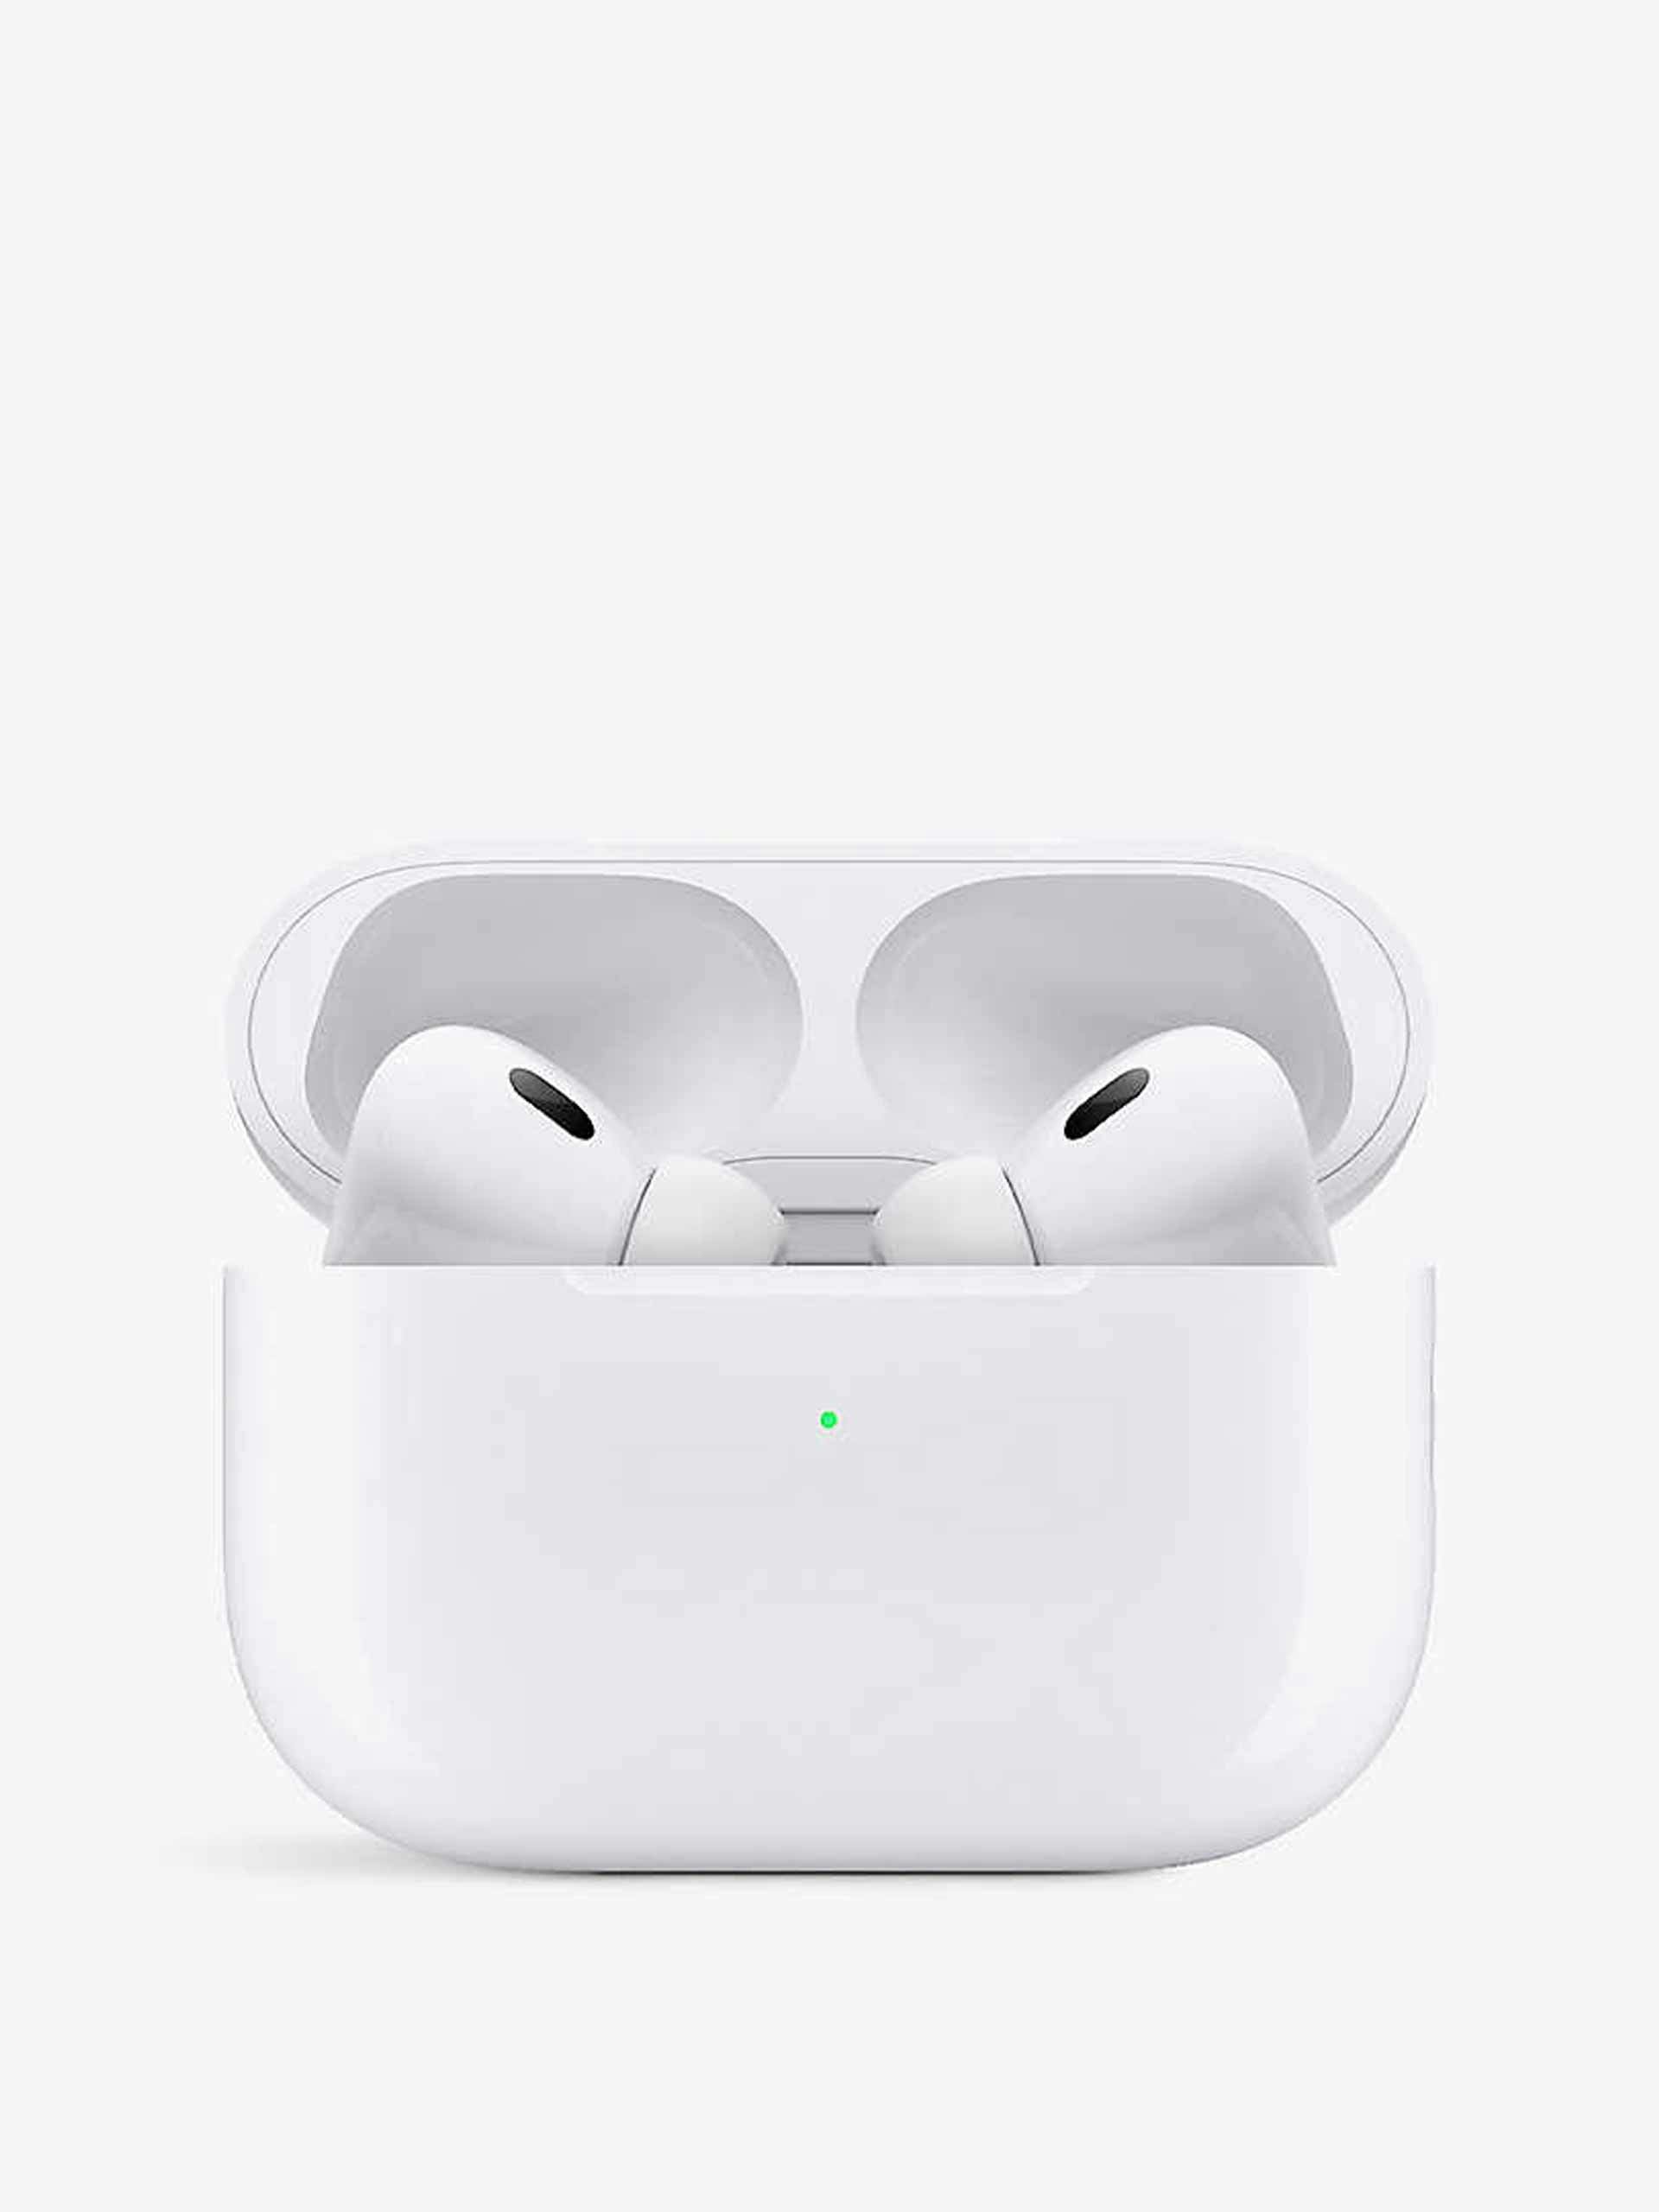 AirPods Pro 2nd generation headphones